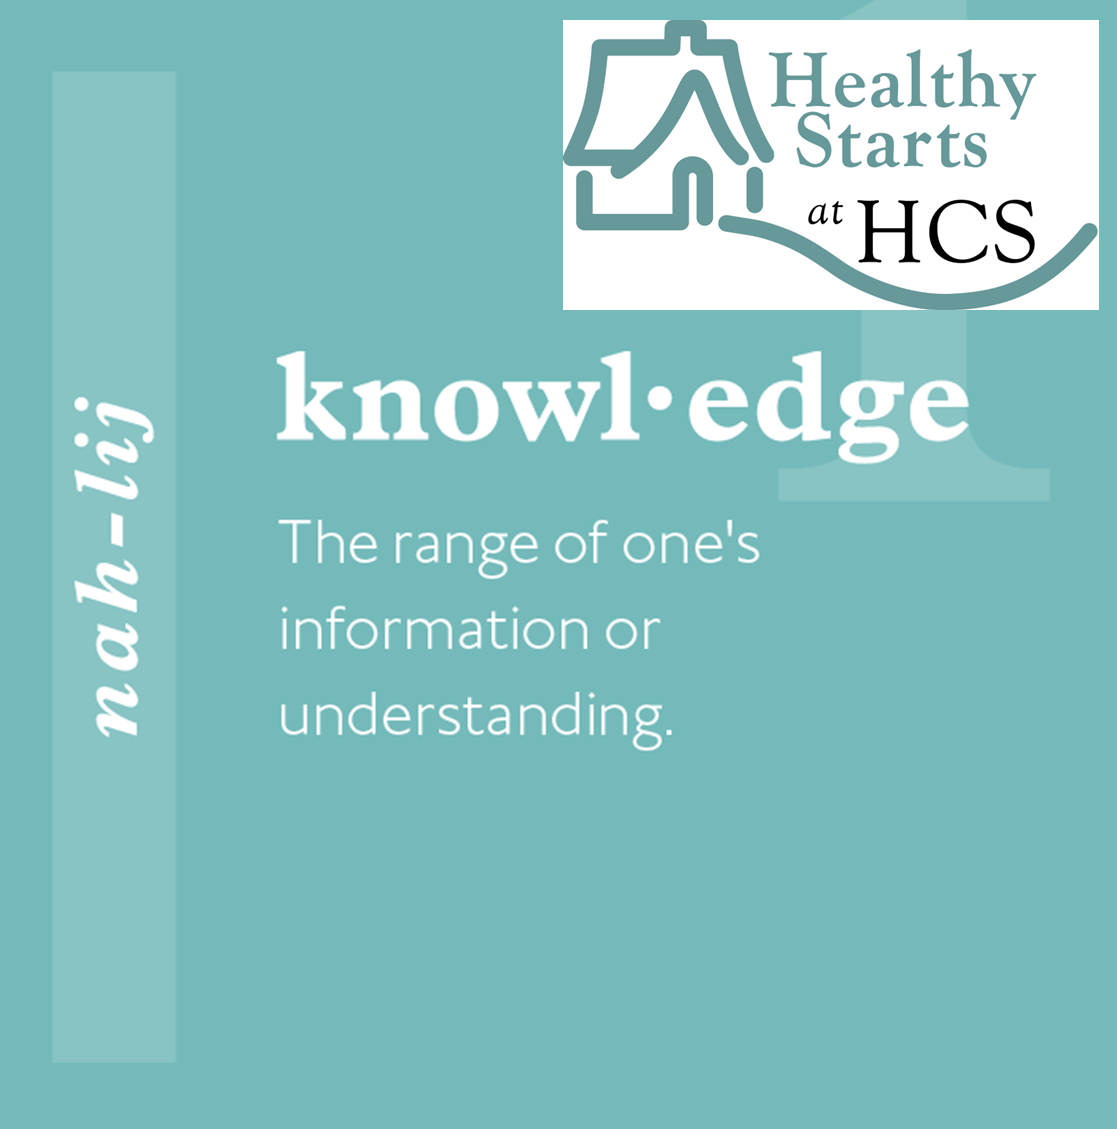 For Abuse Prevention. Definition of Knowledge saying: The range of one's information or understanding.